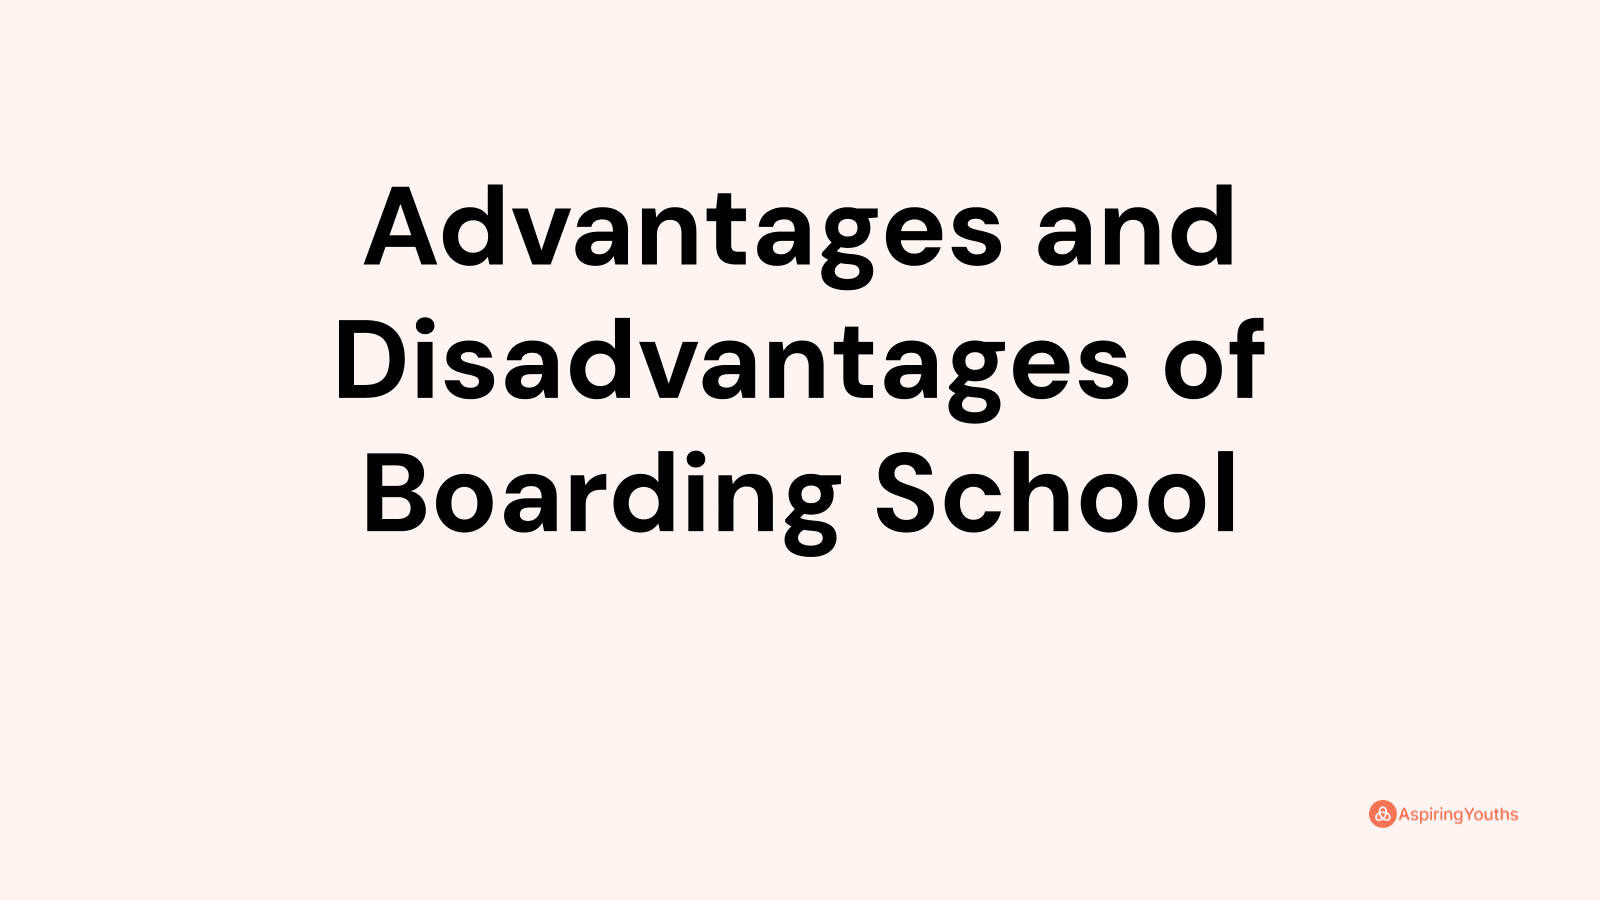 Advantages and disadvantages of Boarding School